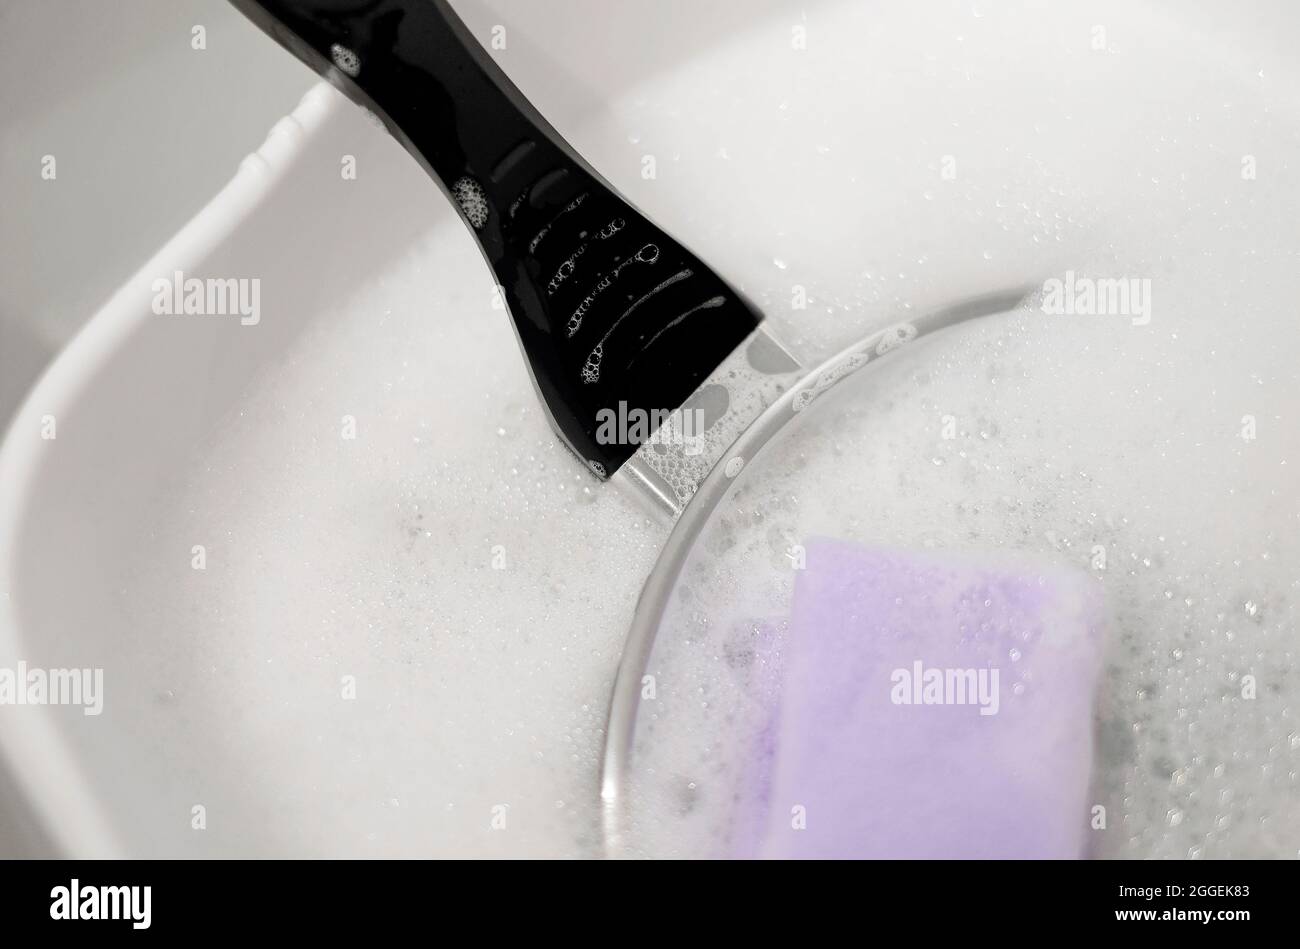 frying pan in soapy washing up water in white plastic bowl Stock Photo